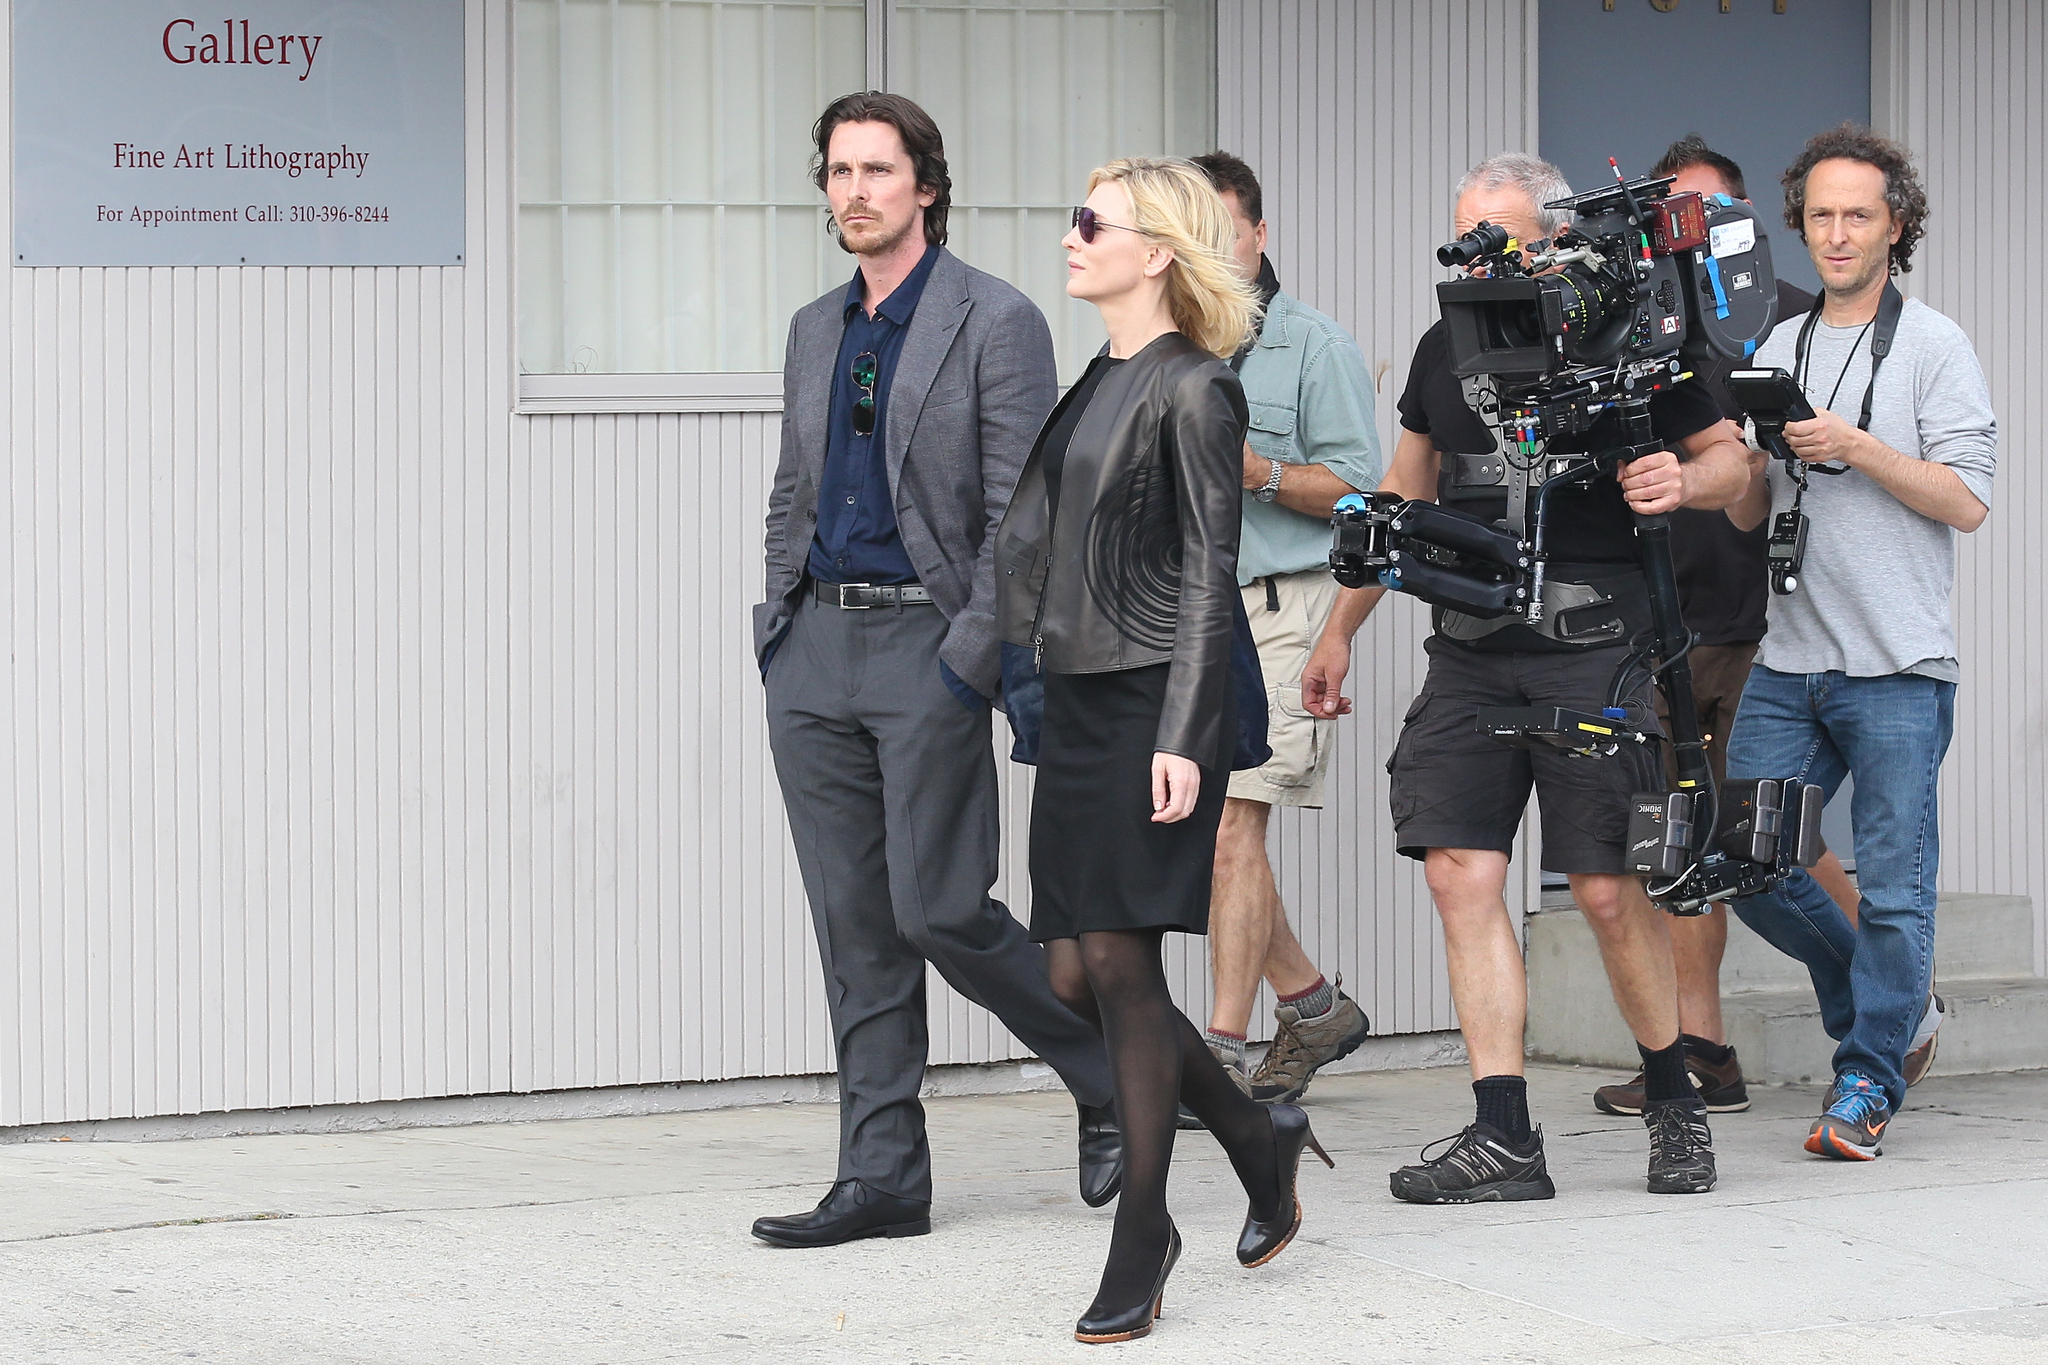 Christian Bale and Cate Blanchett in Knight of Cups (2015)